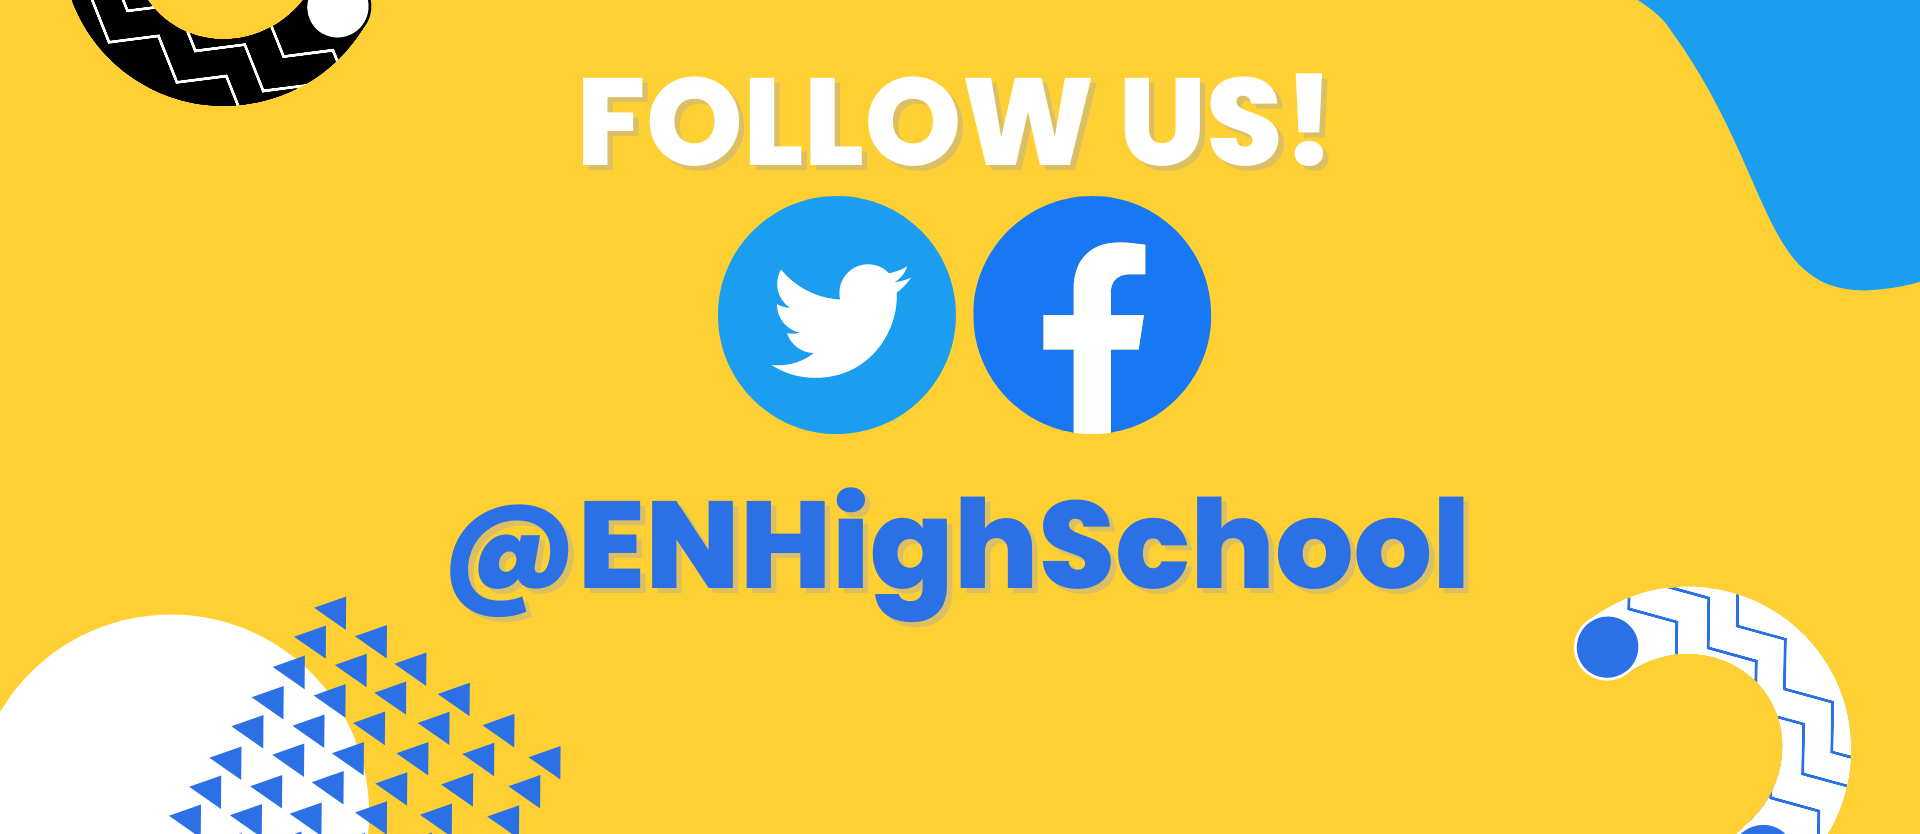 follow us on facebook and twitter at @ENHighSchool